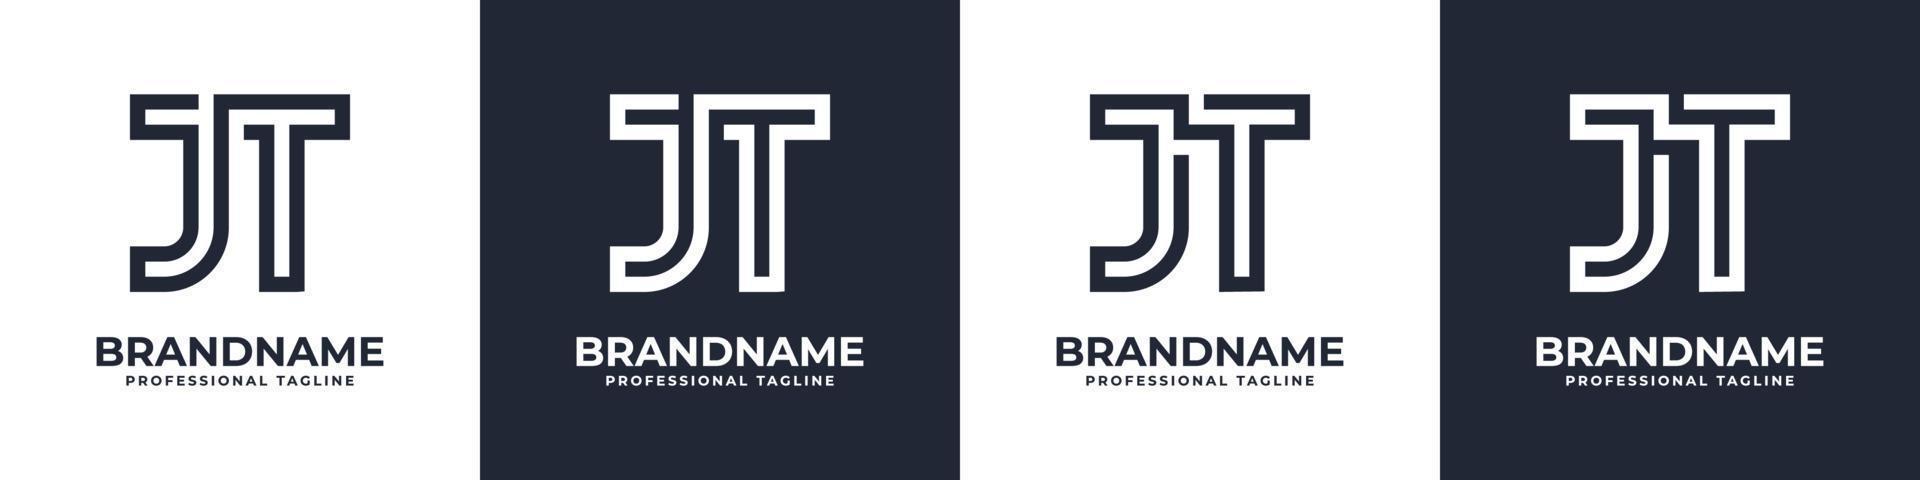 Simple JT Monogram Logo, suitable for any business with JT or TJ initial. vector